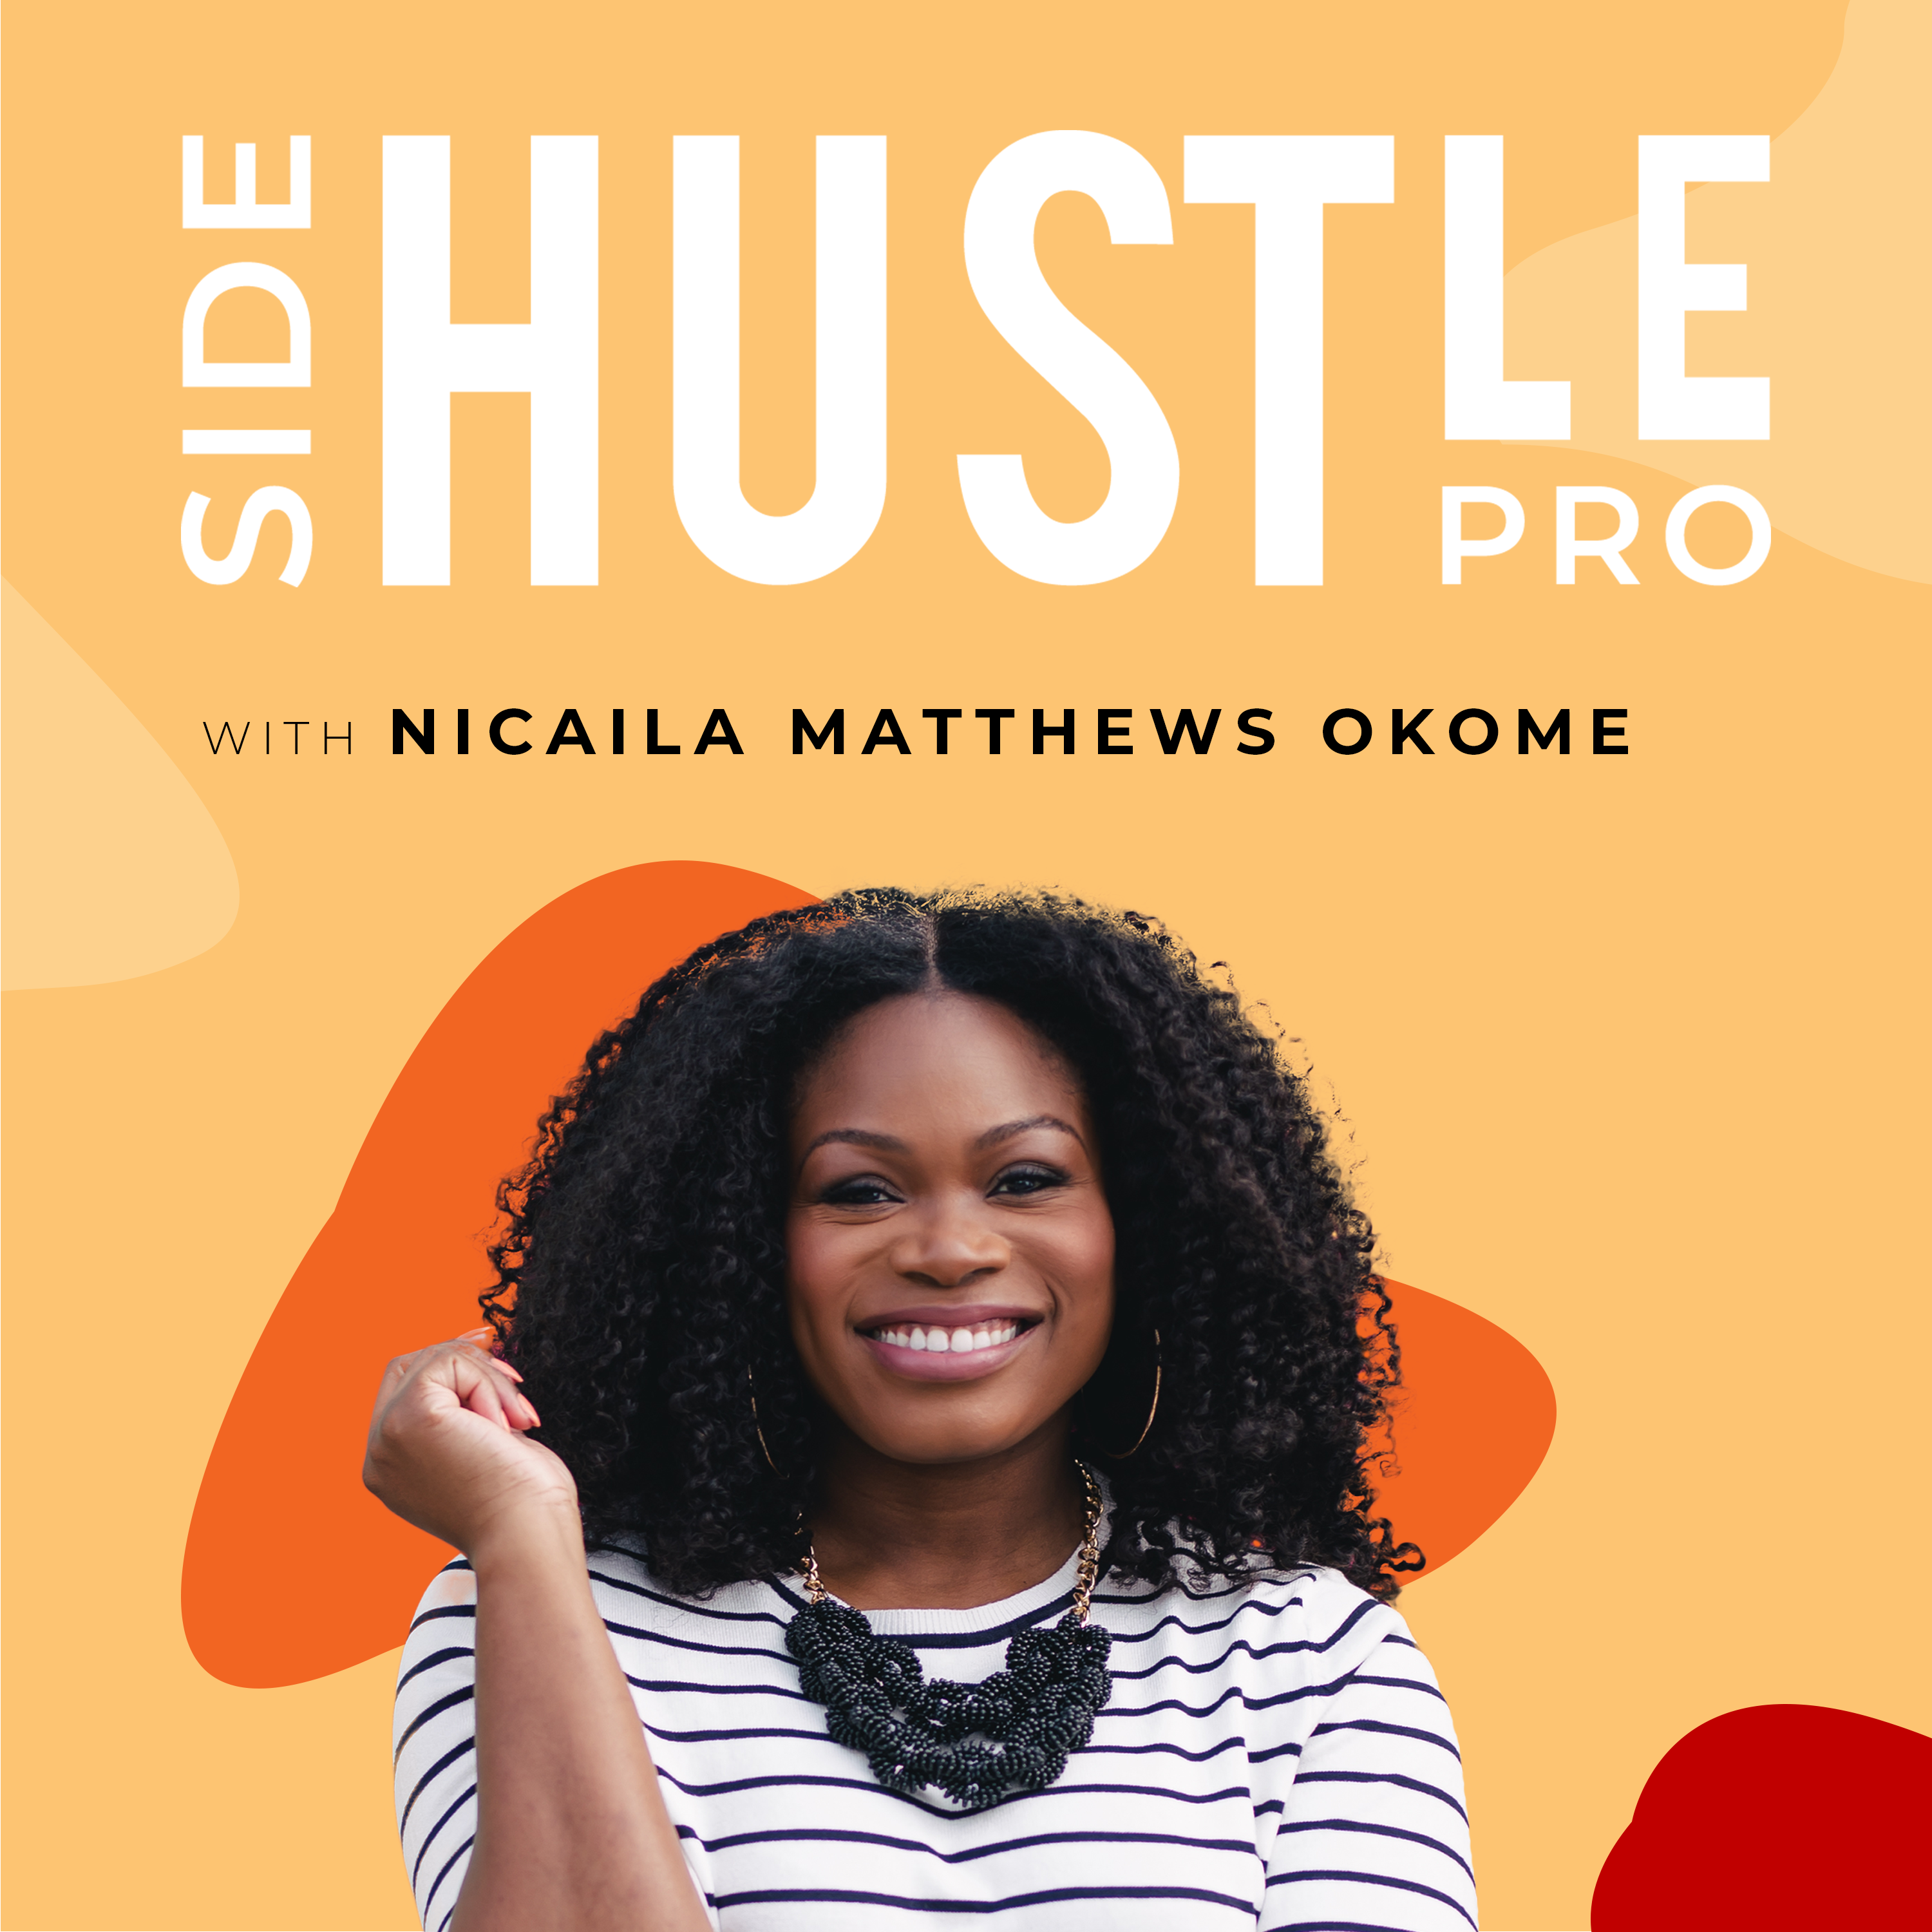 368: How Khadijah Polly Perfected Popcorn And Philanthropy With Her Side Hustles